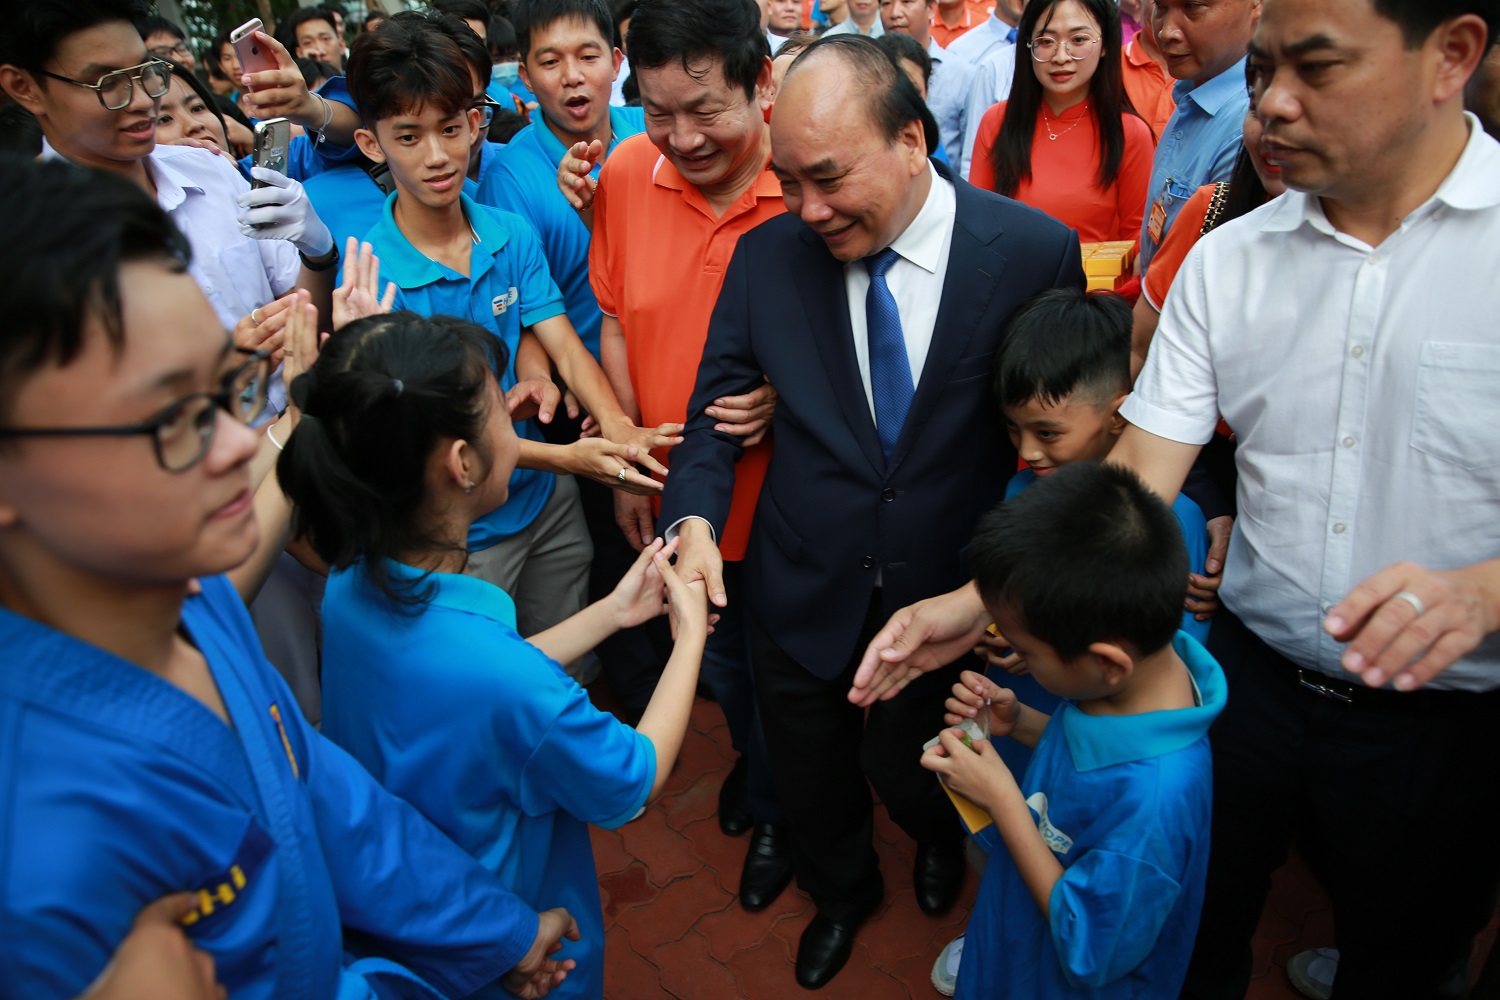 President Nguyen Xuan Phuc met with Hope School students before the first day of school